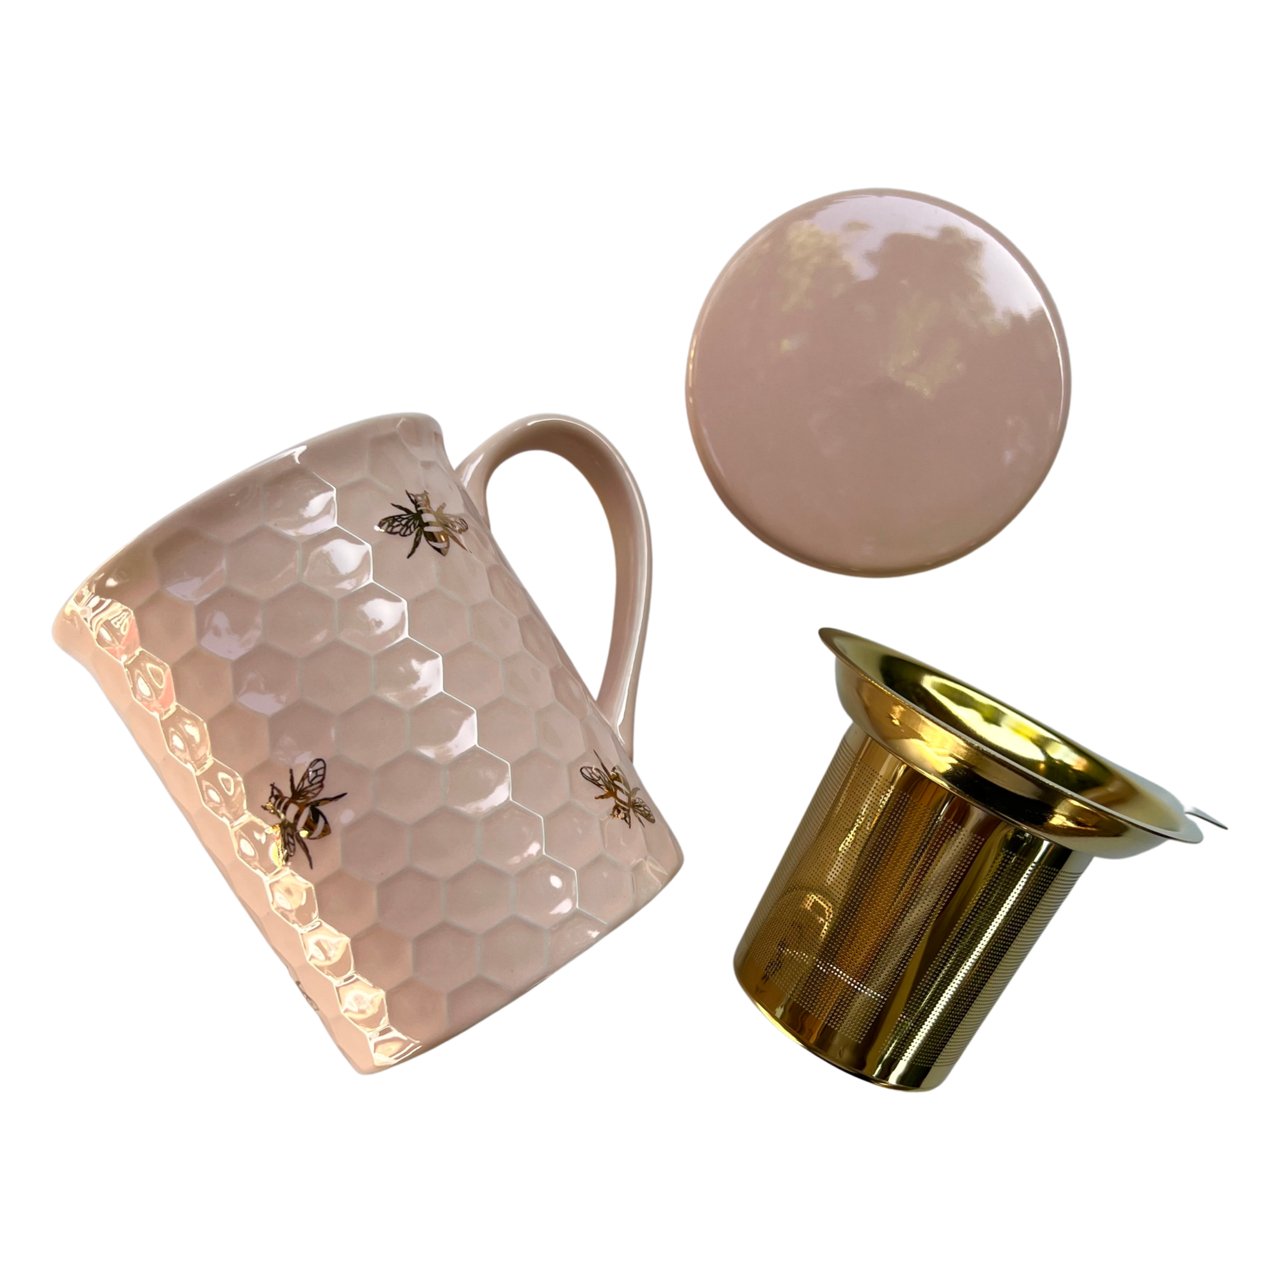 Pinky Up Annette Hello Beautiful Ceramic Tea Mug and Infuser by Pinky